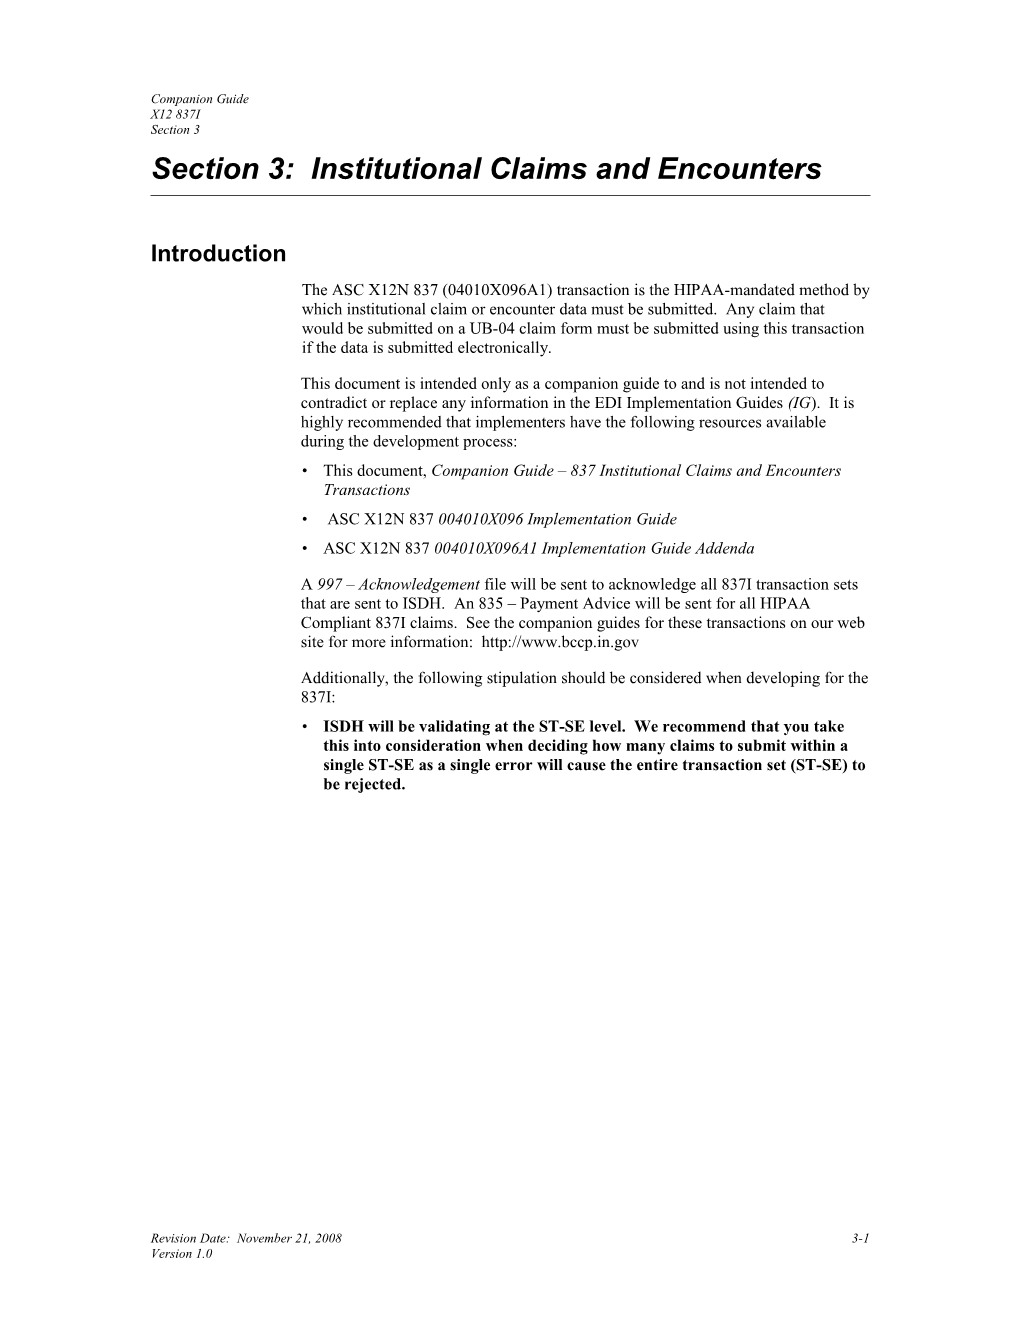 Section 3: Institutional Claims and Encounters